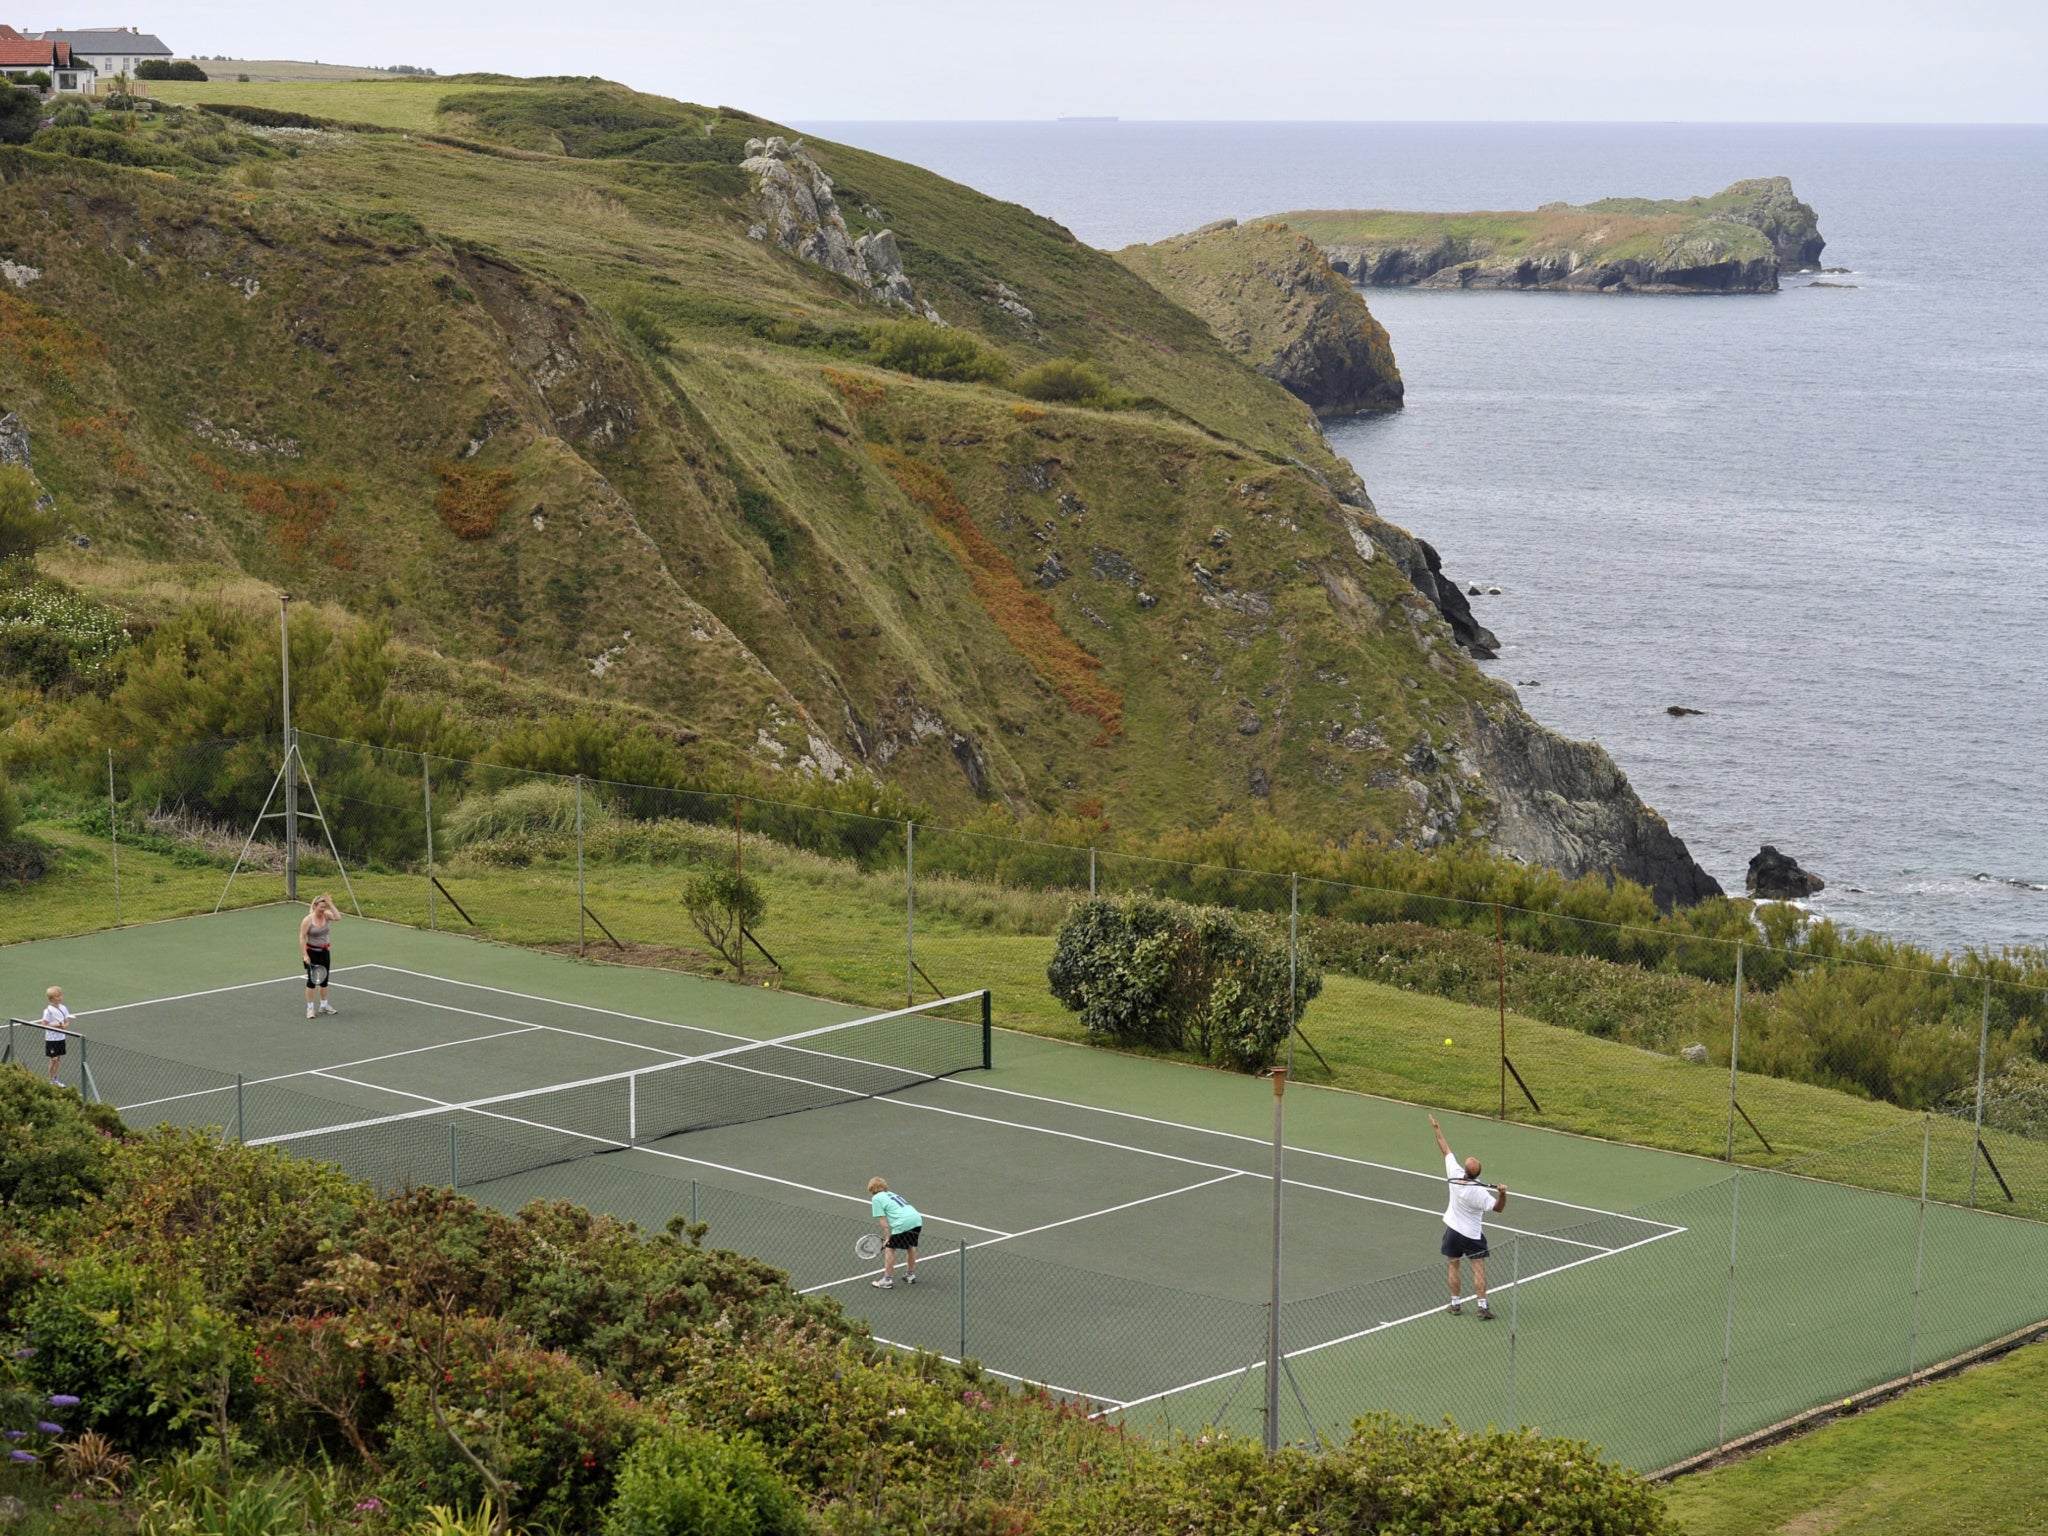 <p>There are tennis courts, indoor and outdoor pools and a play area to enjoy during your stay </p>